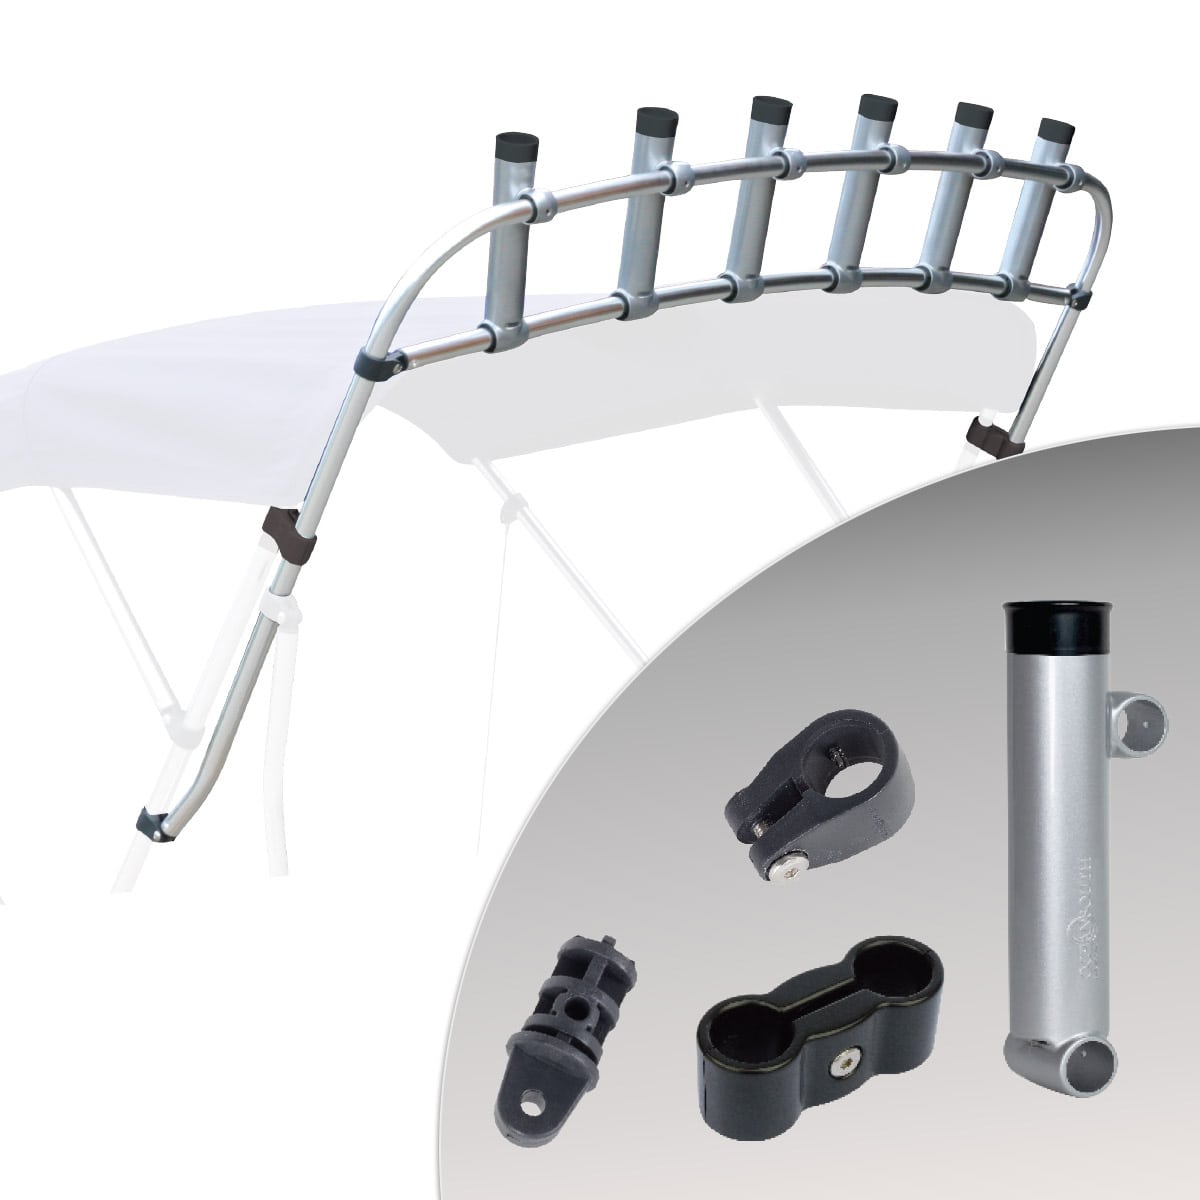 Clamp-On' Fishing Rod Rack Components